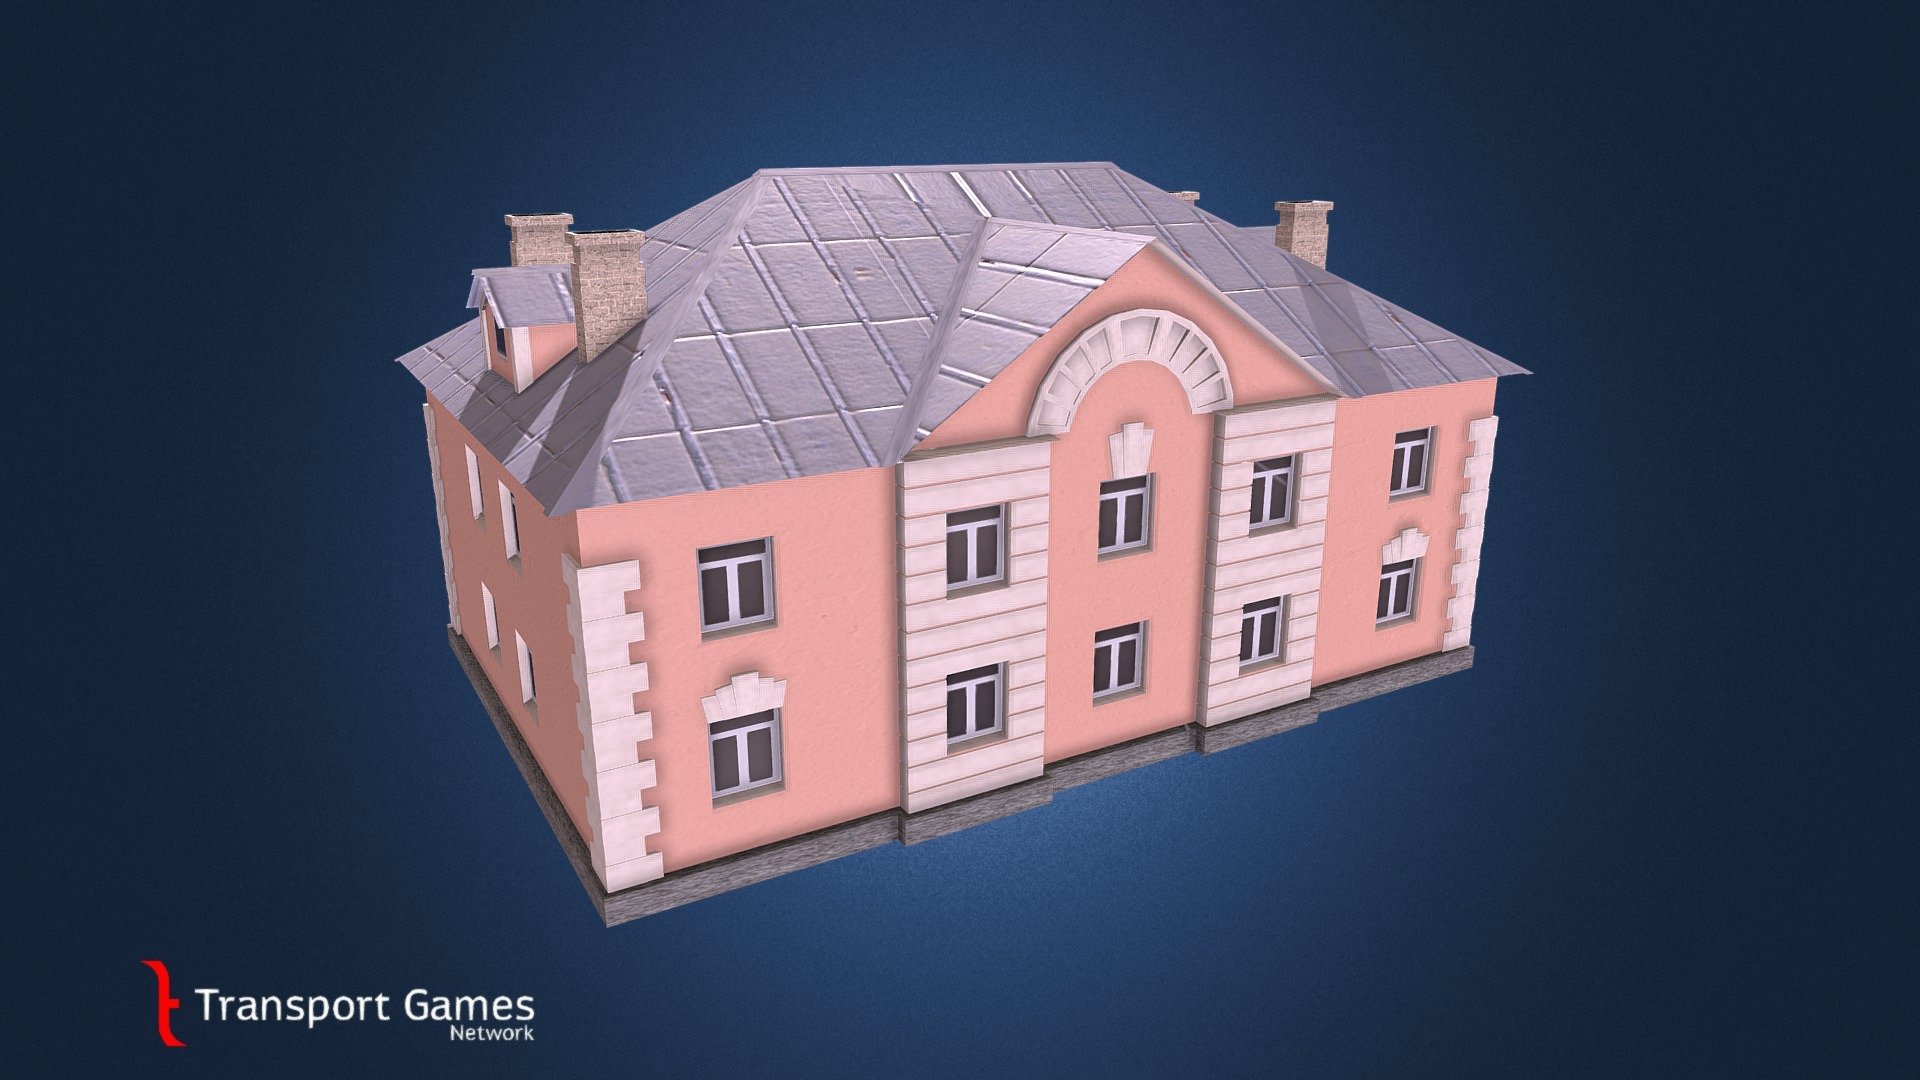 Asset for Citites Skylines.
Series 1-205-7. Version stucco walls.
Typical soviet house in middle 20th century.
 - Residental House proj. 1-205-7 stucco walls - 3D model by targa (@targettius) 3d model